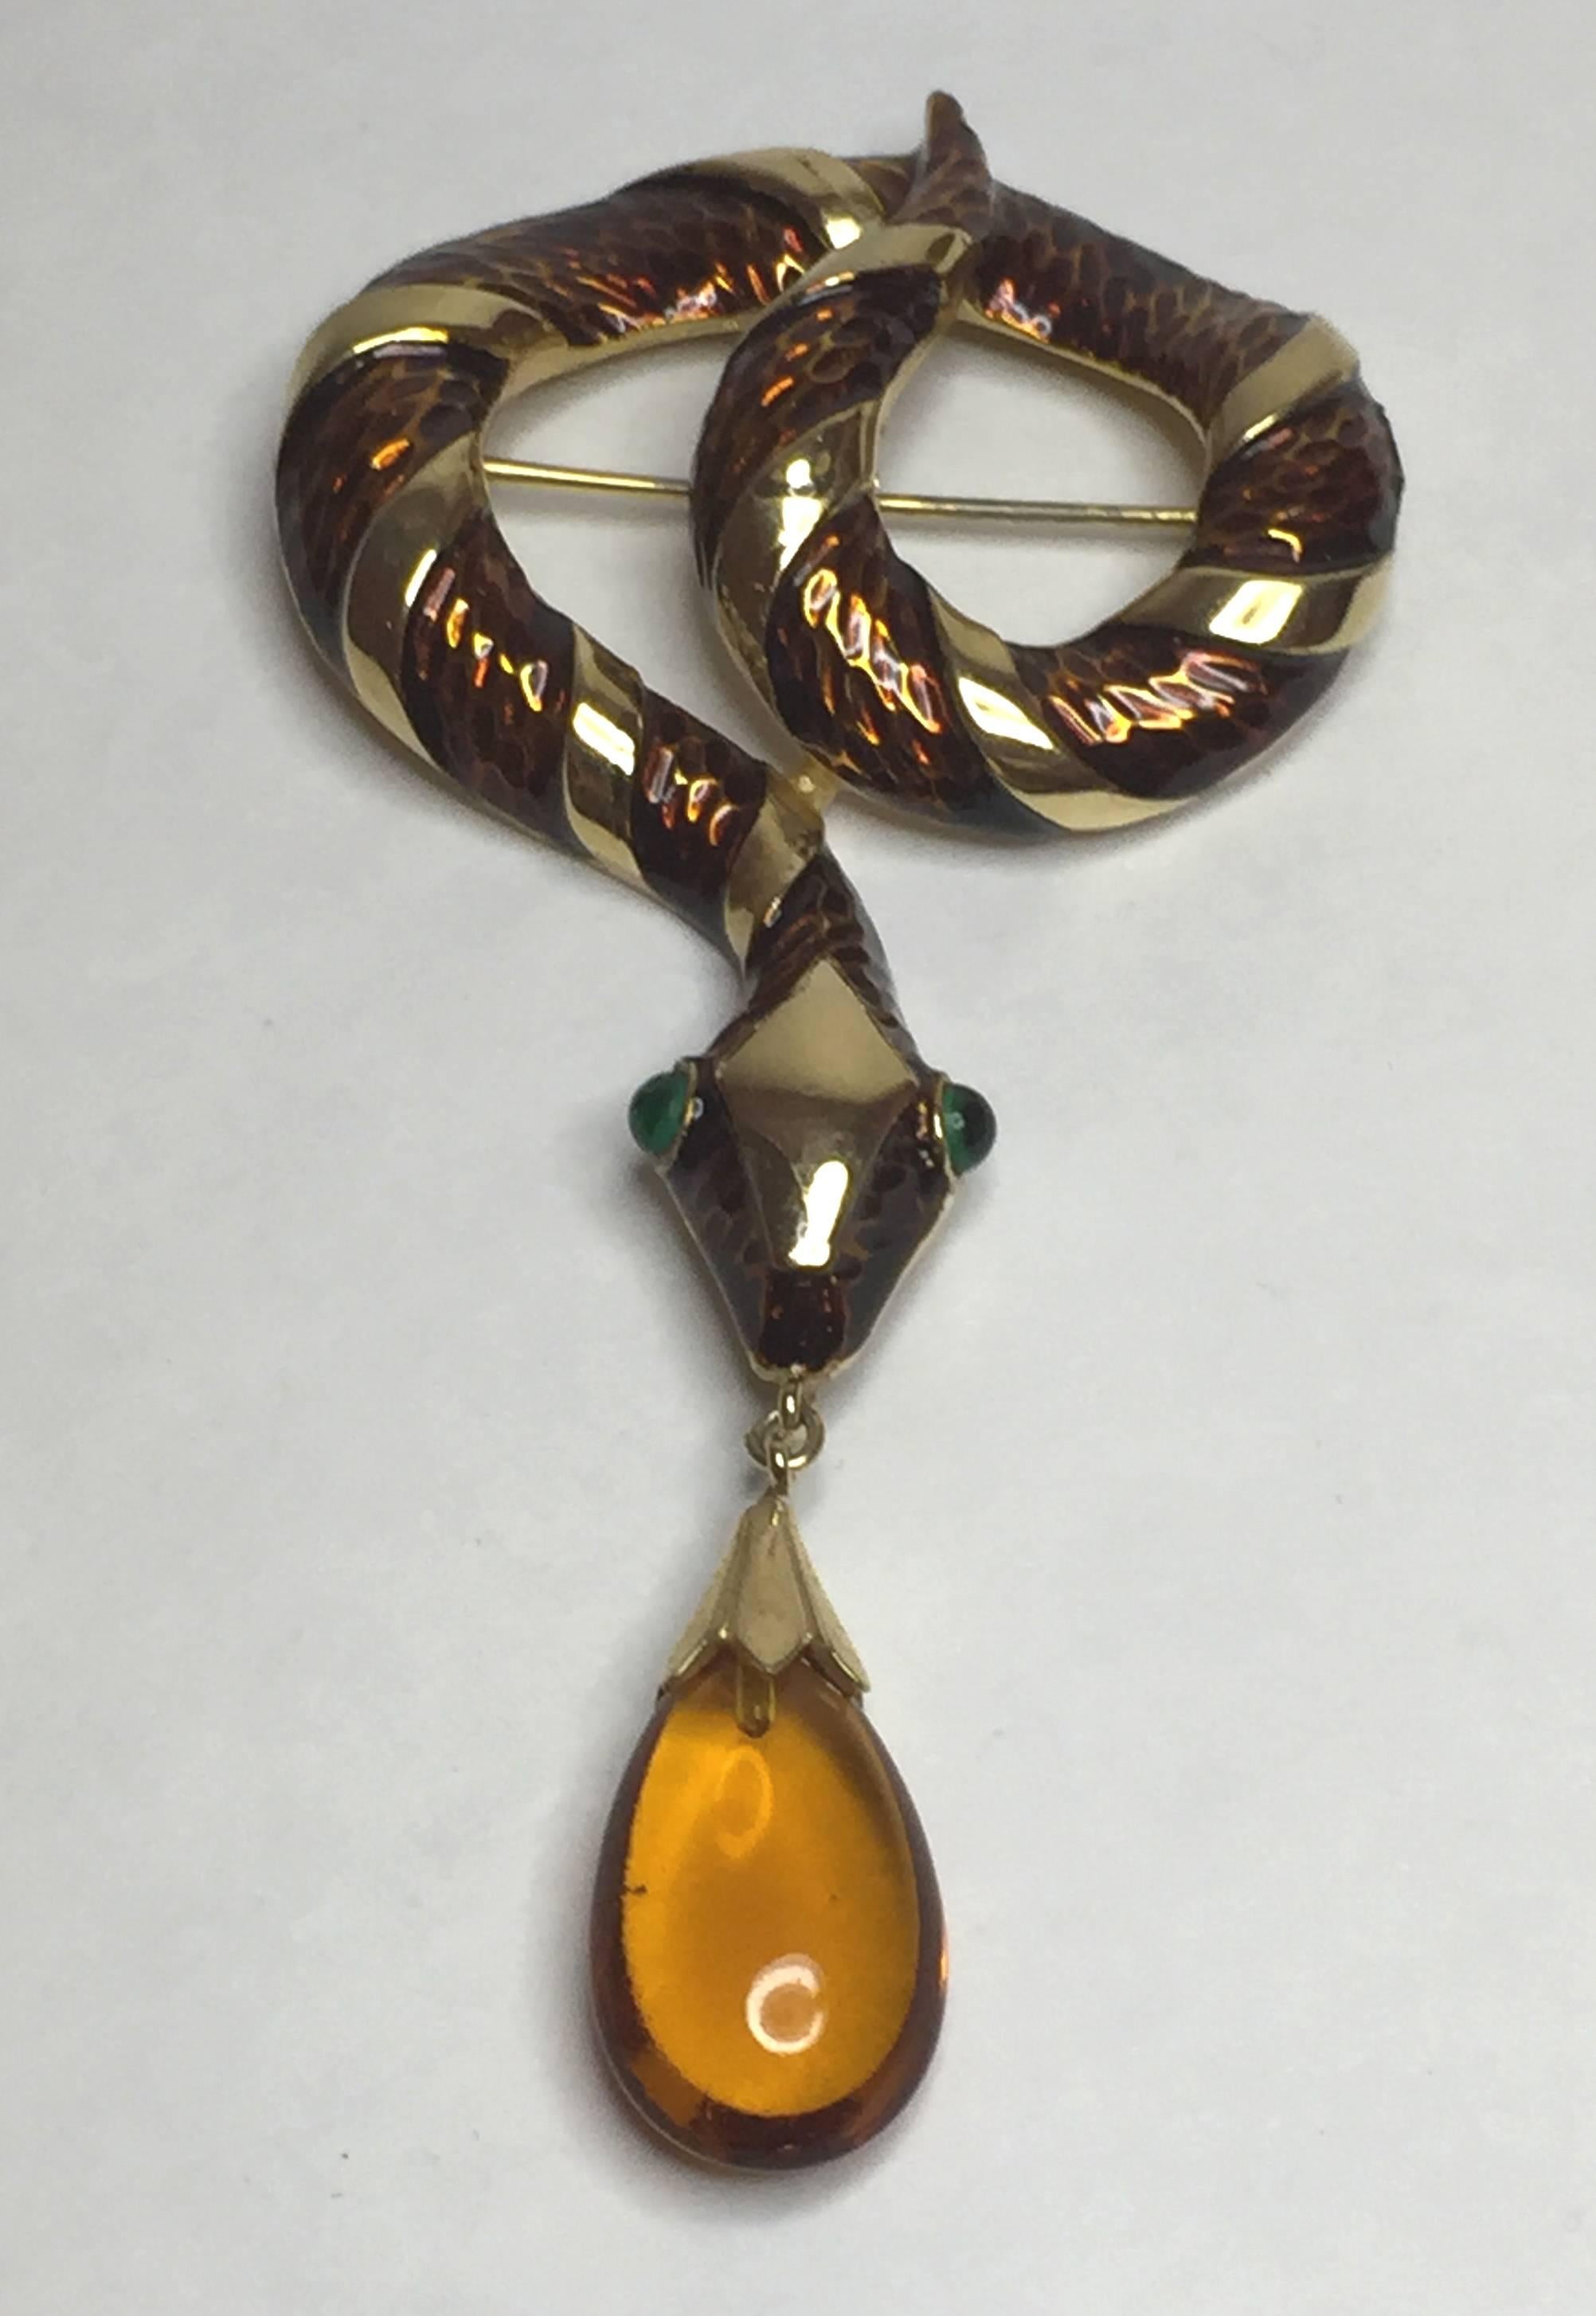 This 1960s TRIFARI Enamel and Brilliant Goldtone Coiled Snake Brooch Pin with Amber Teardrop is exotic and alluring as a figural fashion accessory. The high polish goldtone Trifanium finish is accented by rich glowing enamelling. The intense eyes of